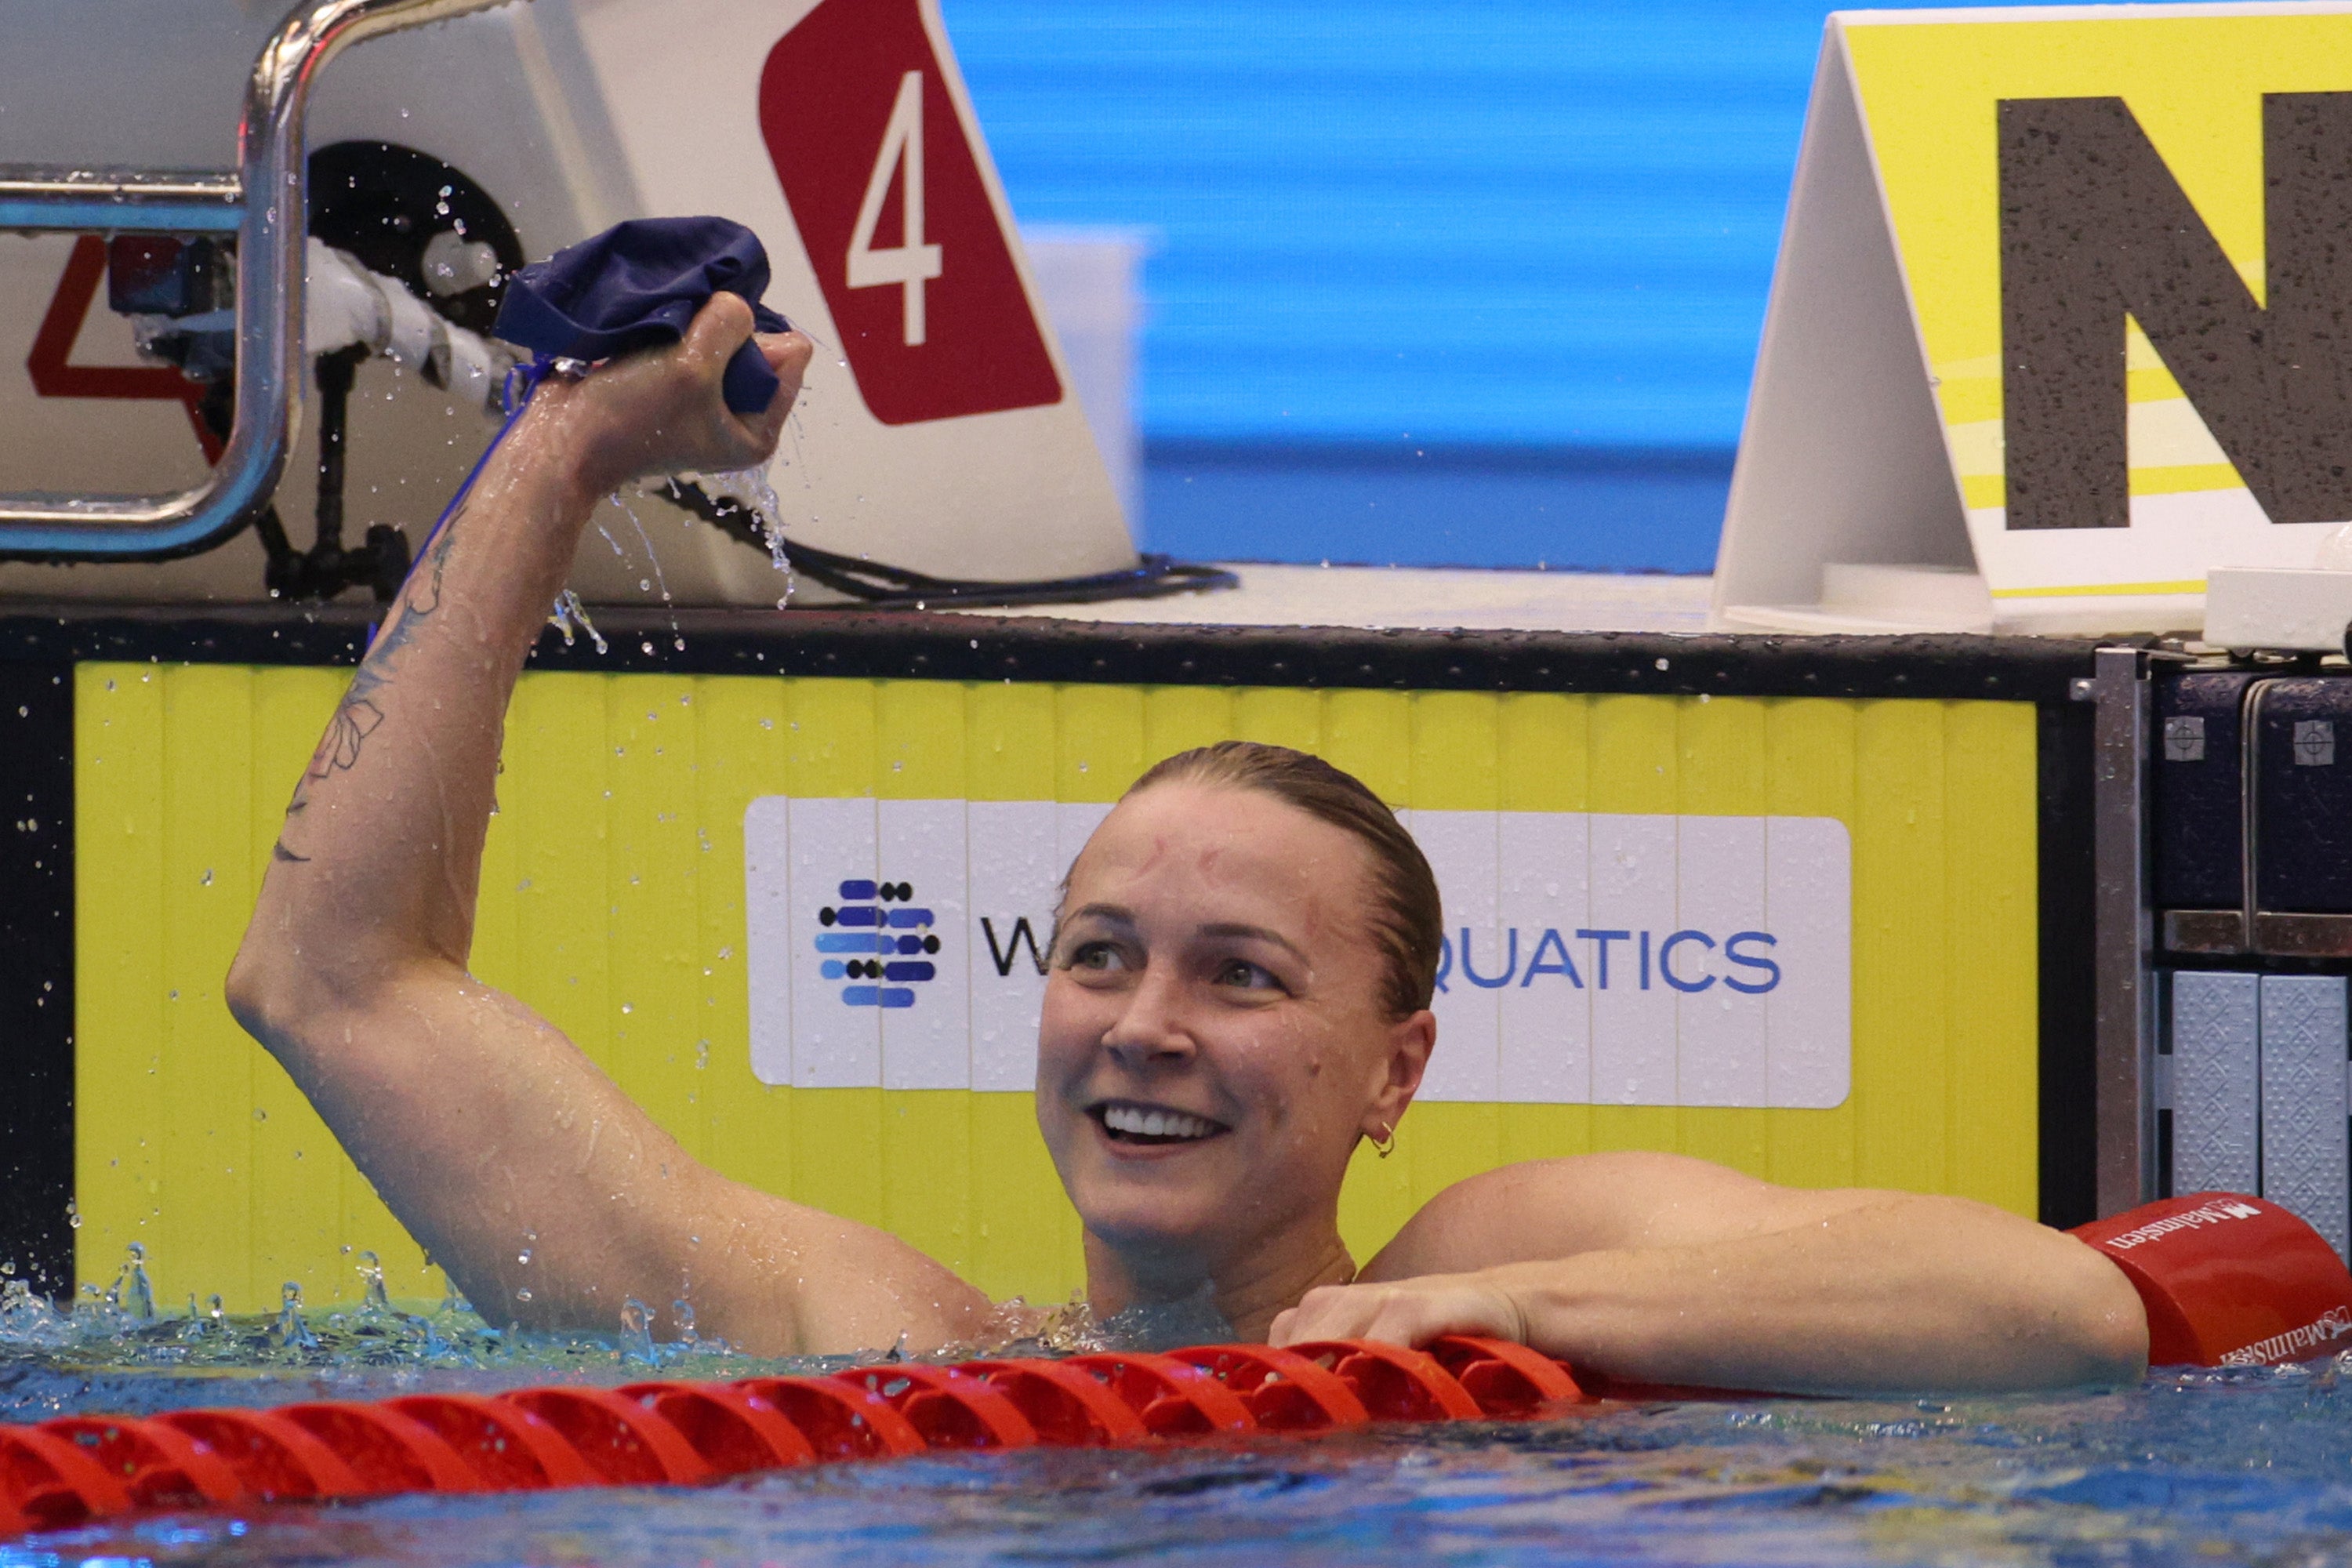 Sjostrom could celebrate beating Phelps’ record